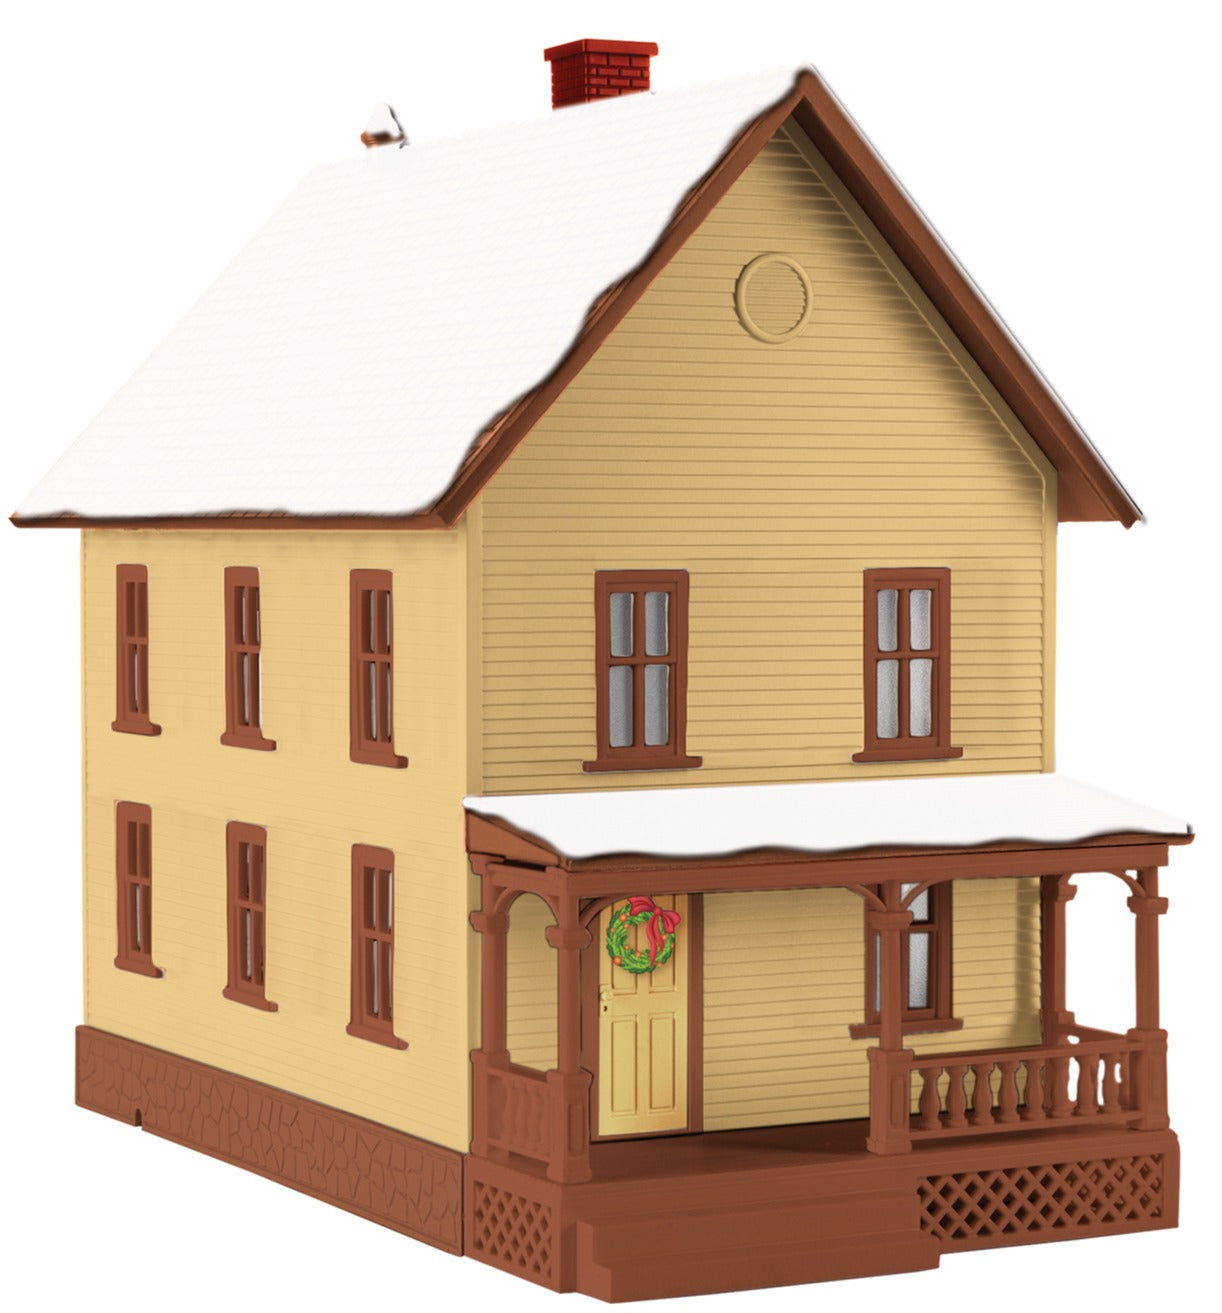 Lionel 2429090 - The Polar Express - Billy's House